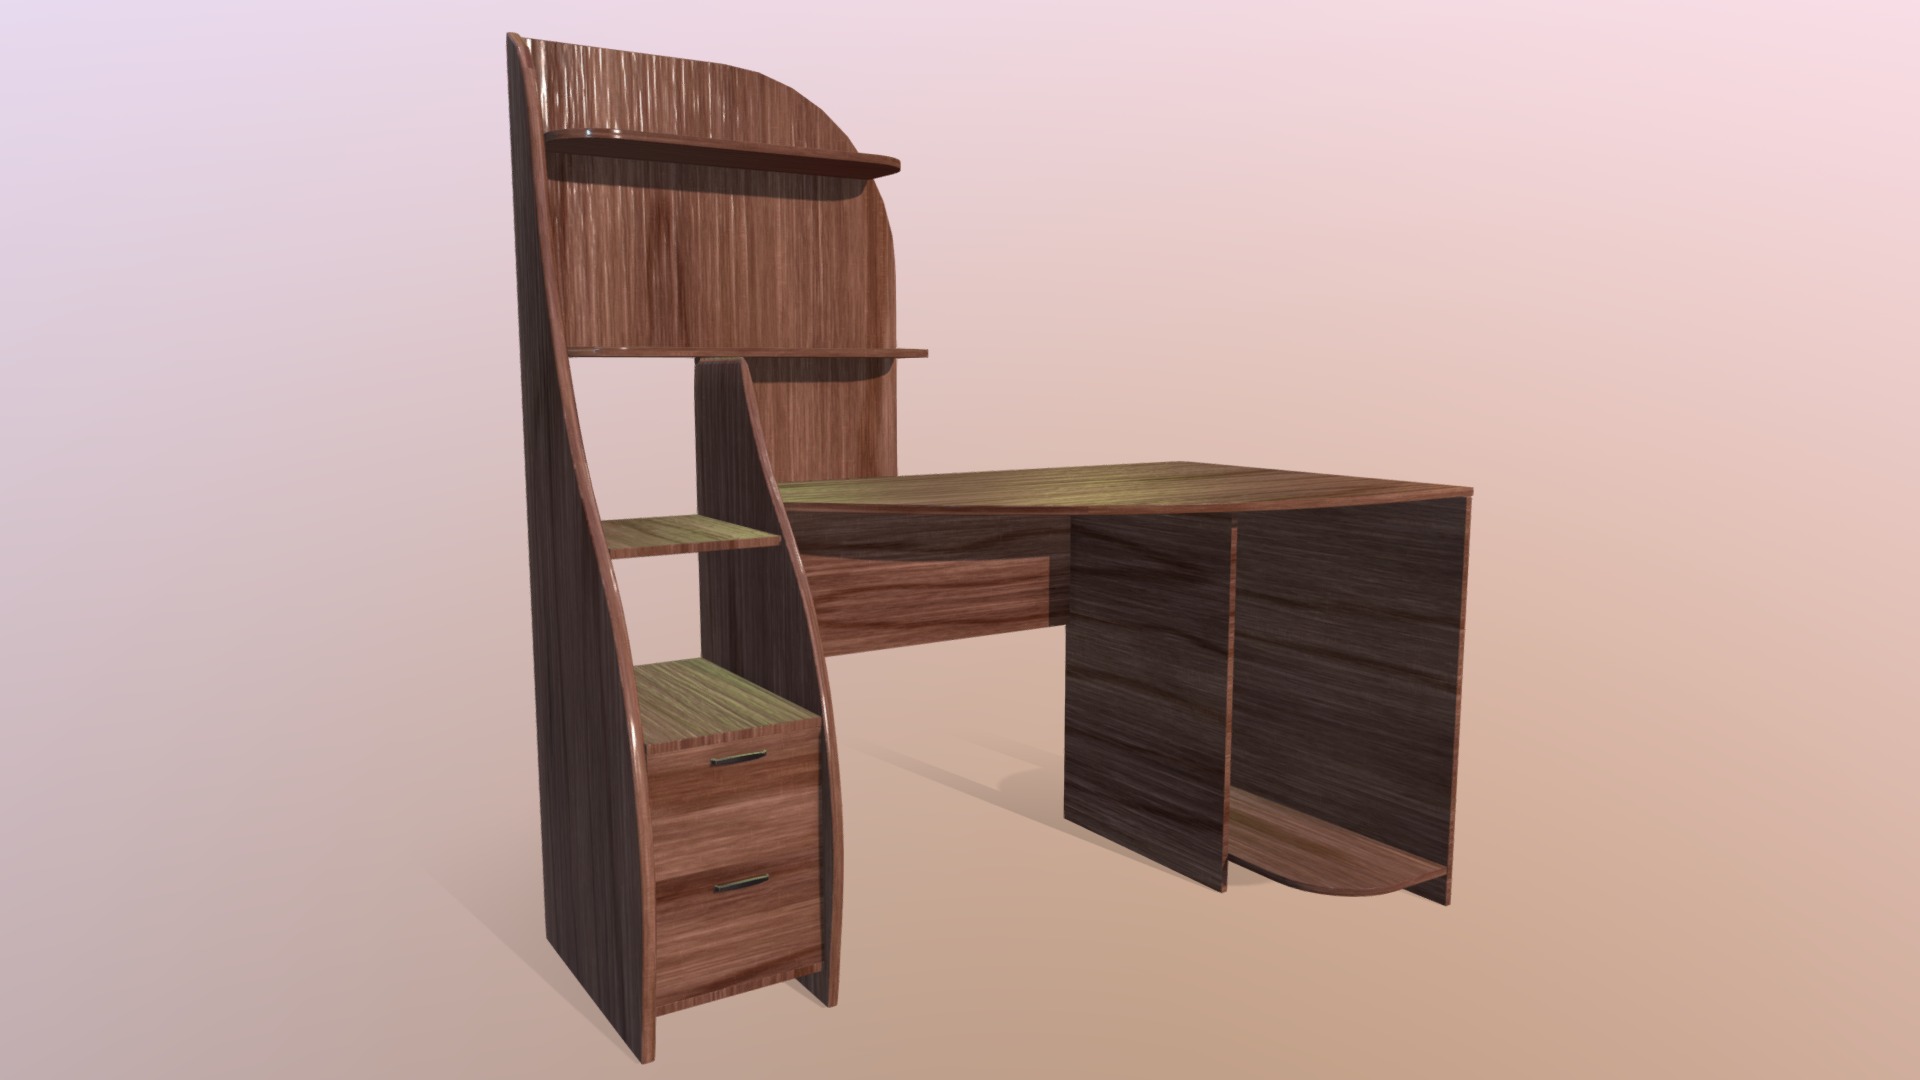 3D model Computer Desk Wood - This is a 3D model of the Computer Desk Wood. The 3D model is about a wooden structure with a window.